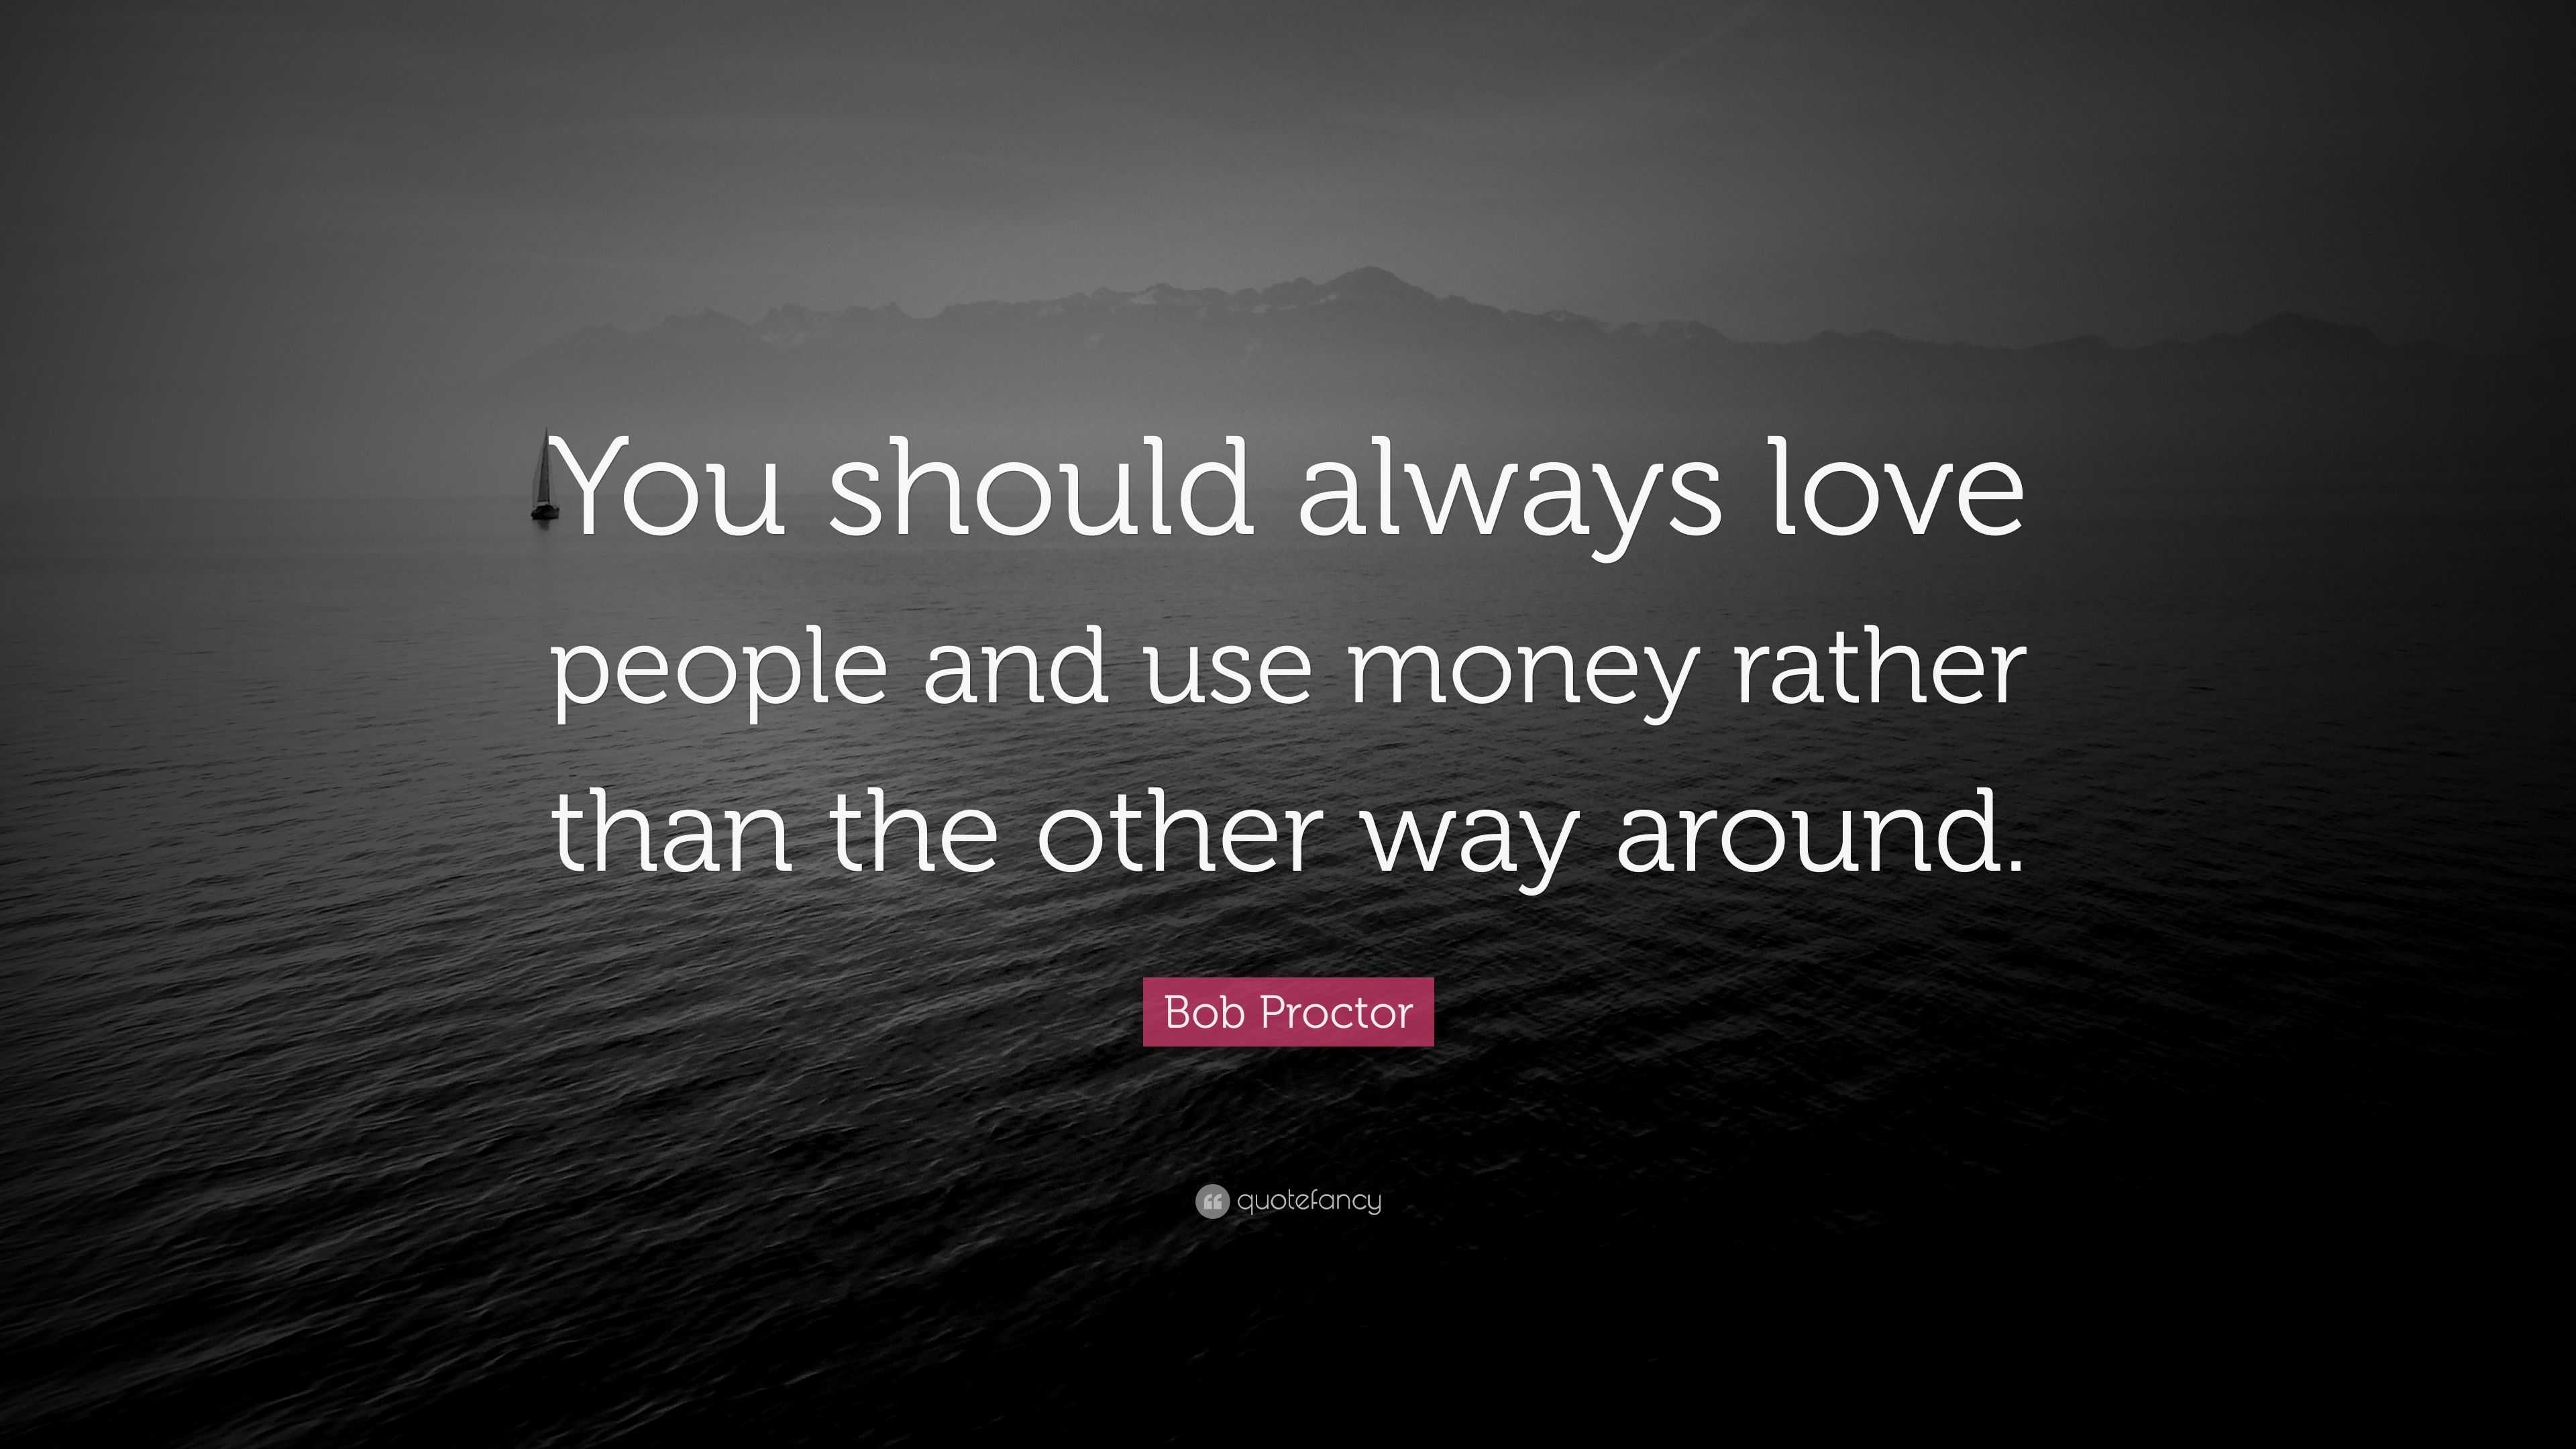 Bob Proctor Quote: “You should always love people and use money rather ...